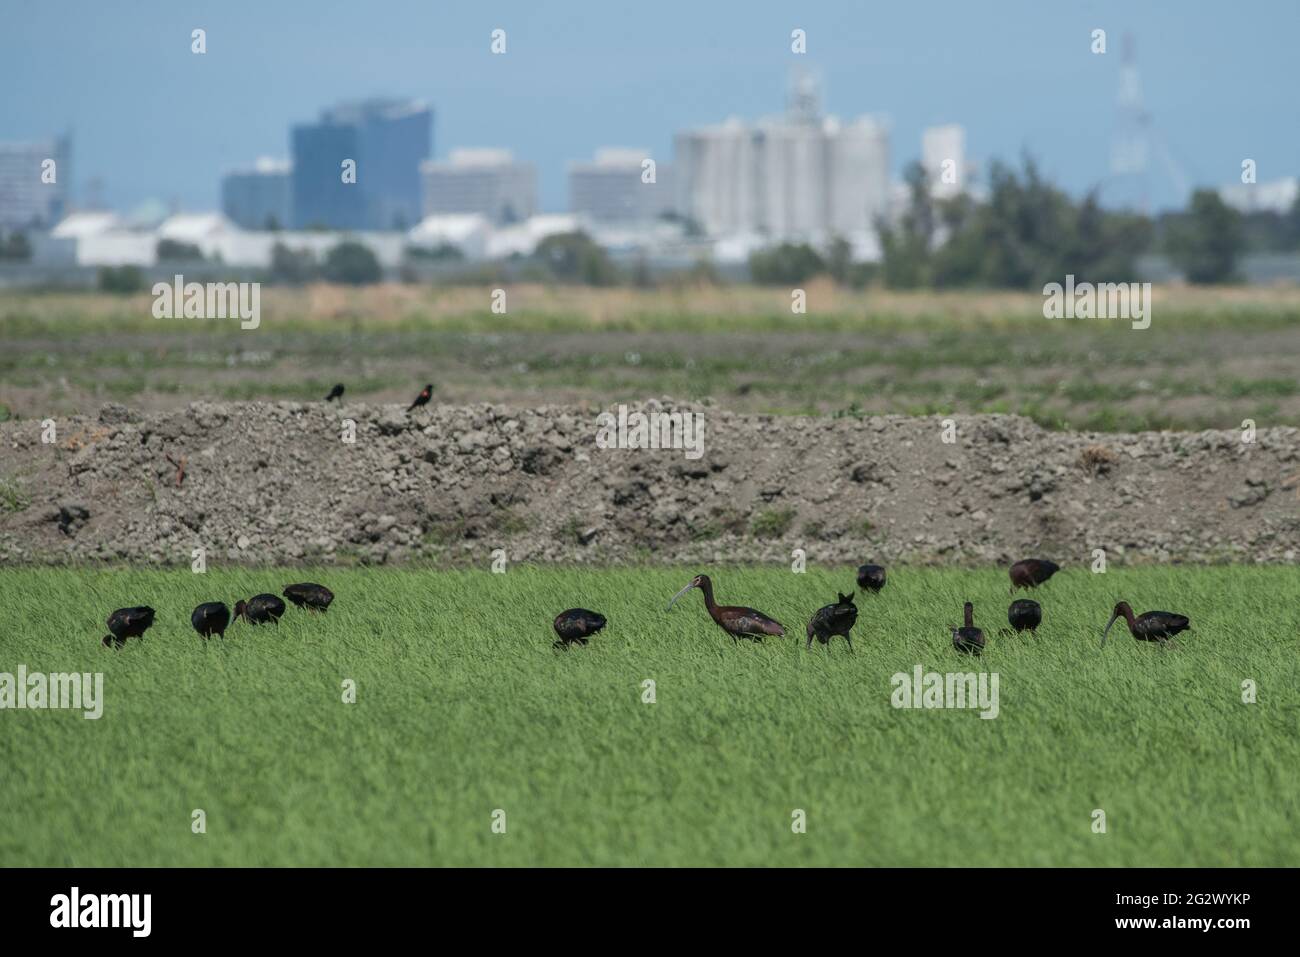 White faced ibis (Plegadis chihi) in a flooded rice field with the Sacramento skyline in the distance behind the flock. Stock Photo